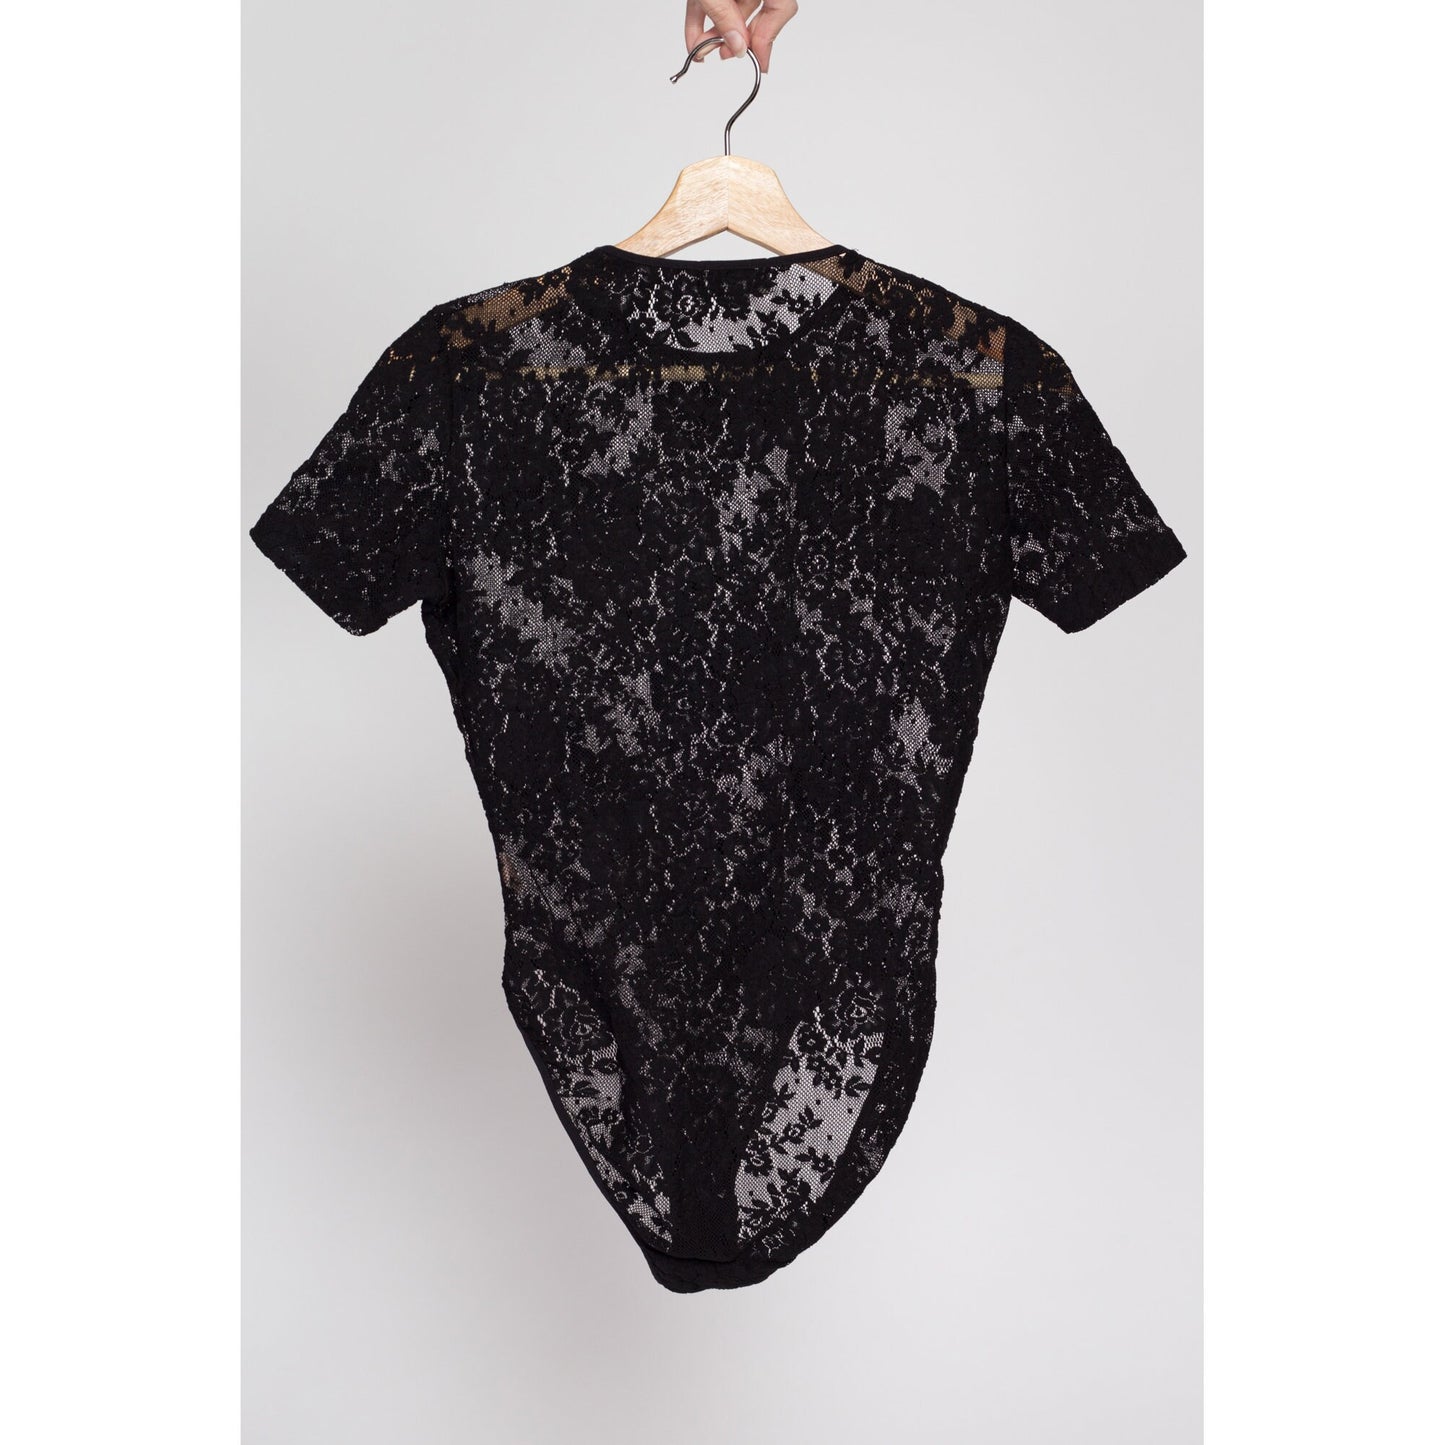 Small 90s Black Lace Bodysuit Top | Vintage Ann Taylor Sheer Short Sleeve One Piece